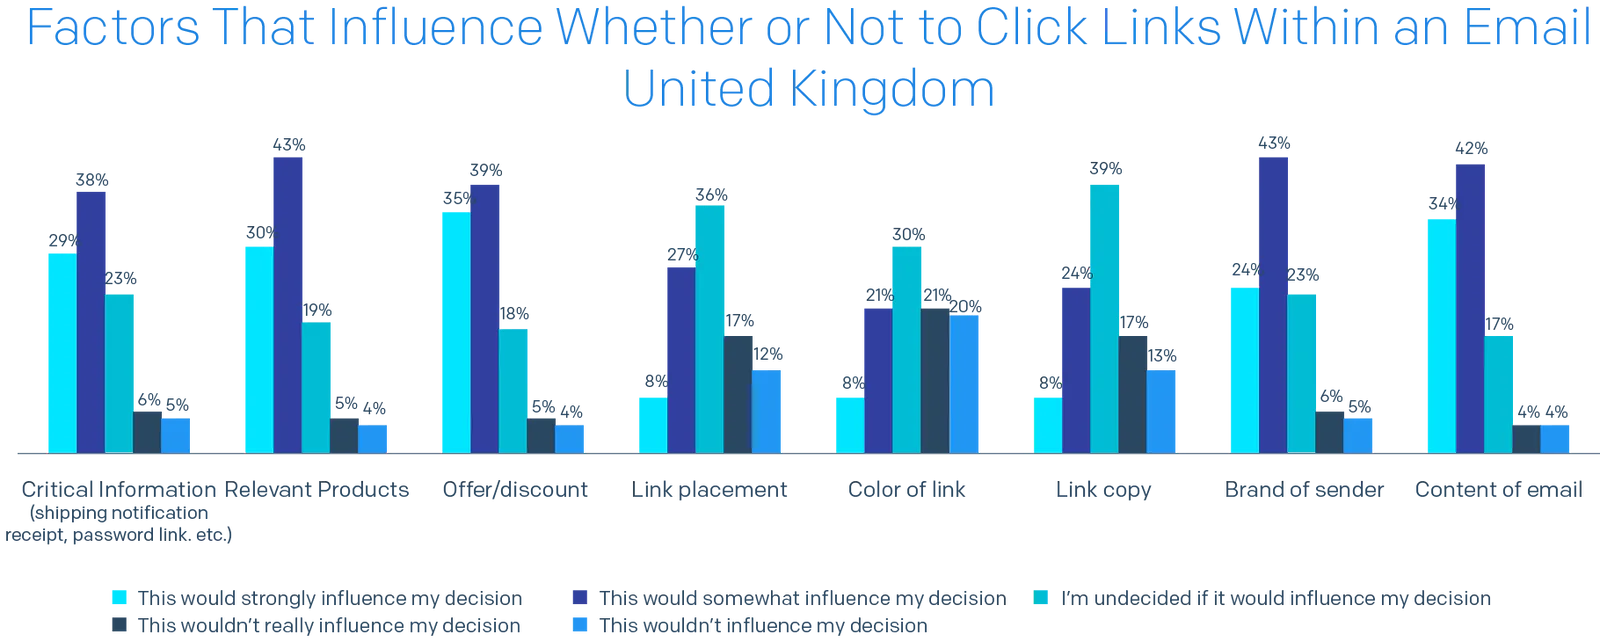 Bar chart of Factors That Influence Whether or Not to Click Links Within an Email in the United Kingdom